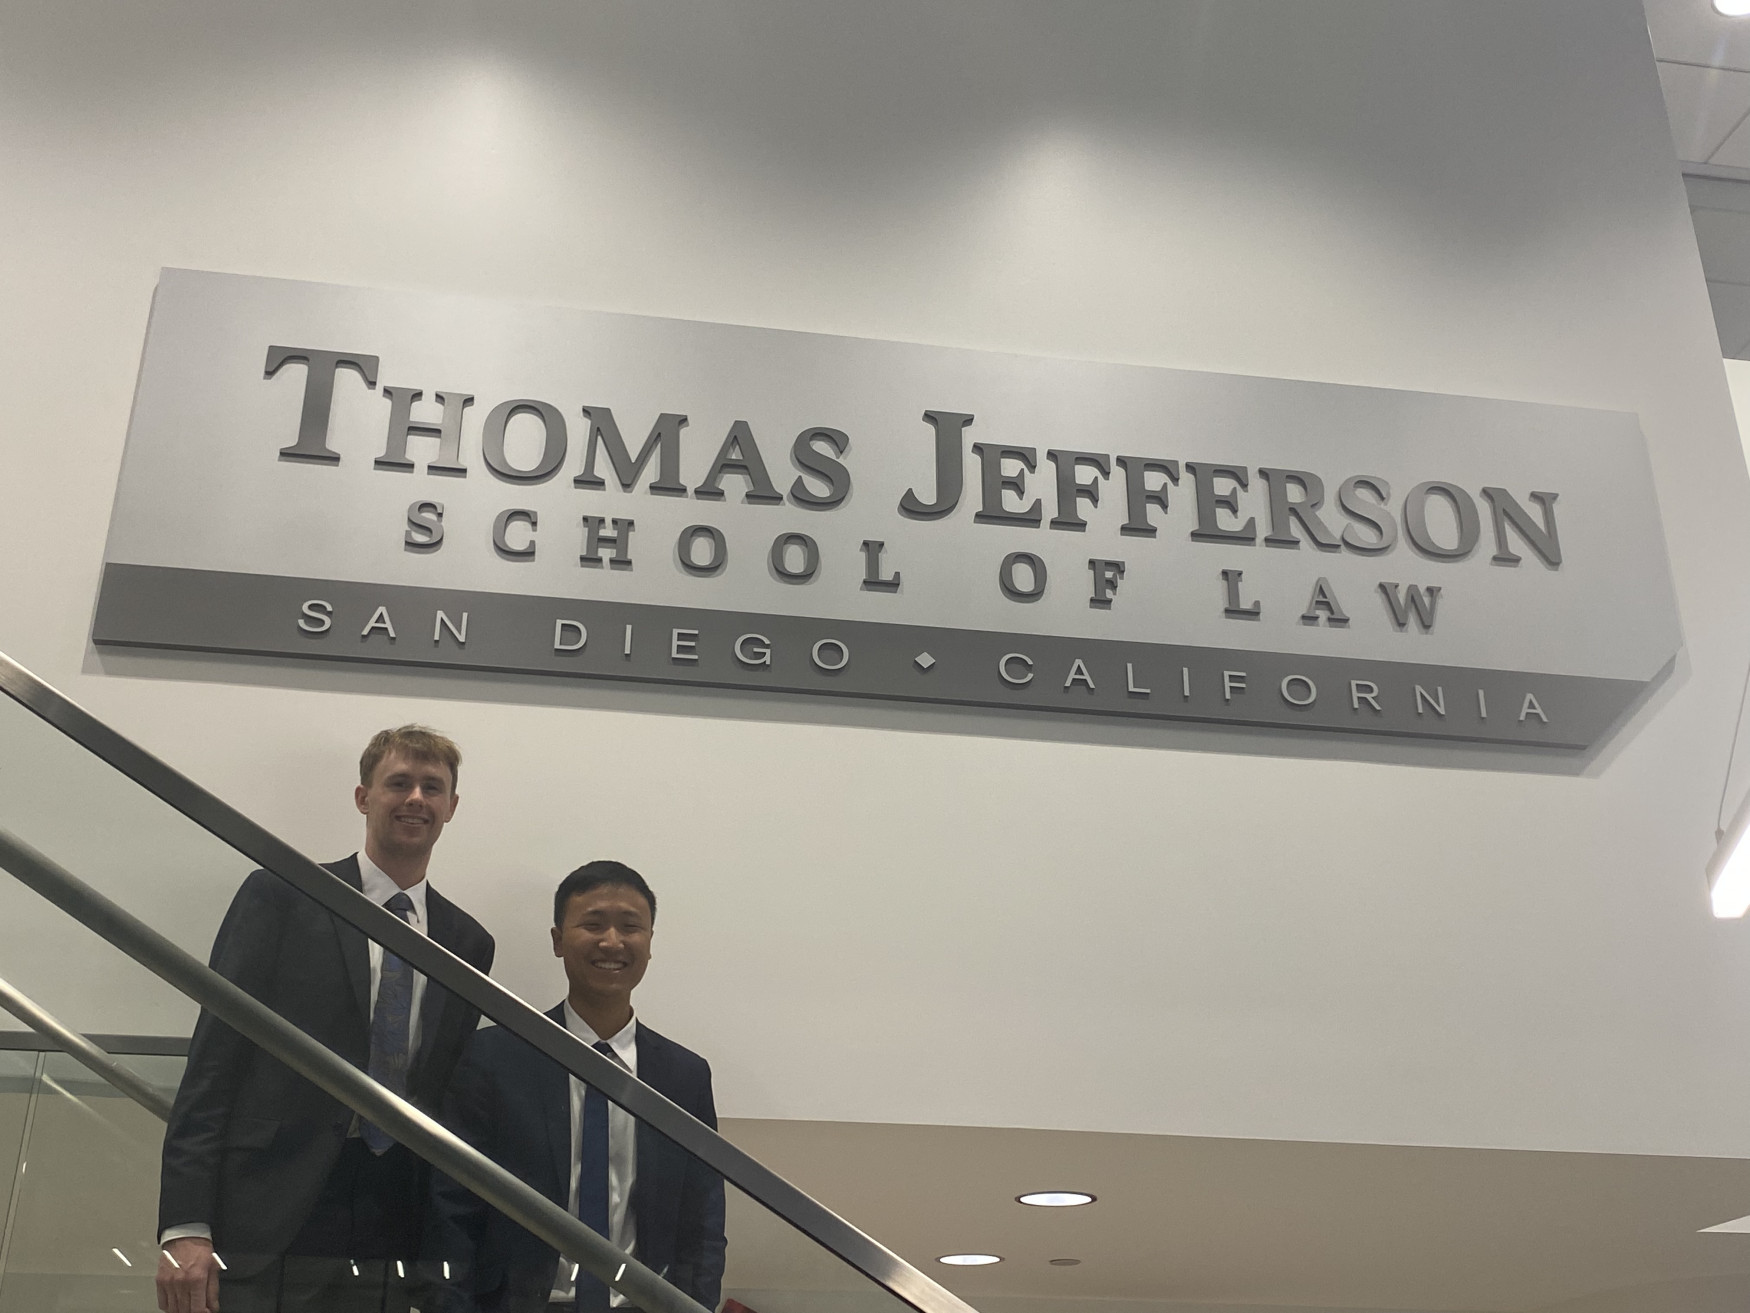 Law students represented at National Sports Law Negotiation – TRU Newsroom